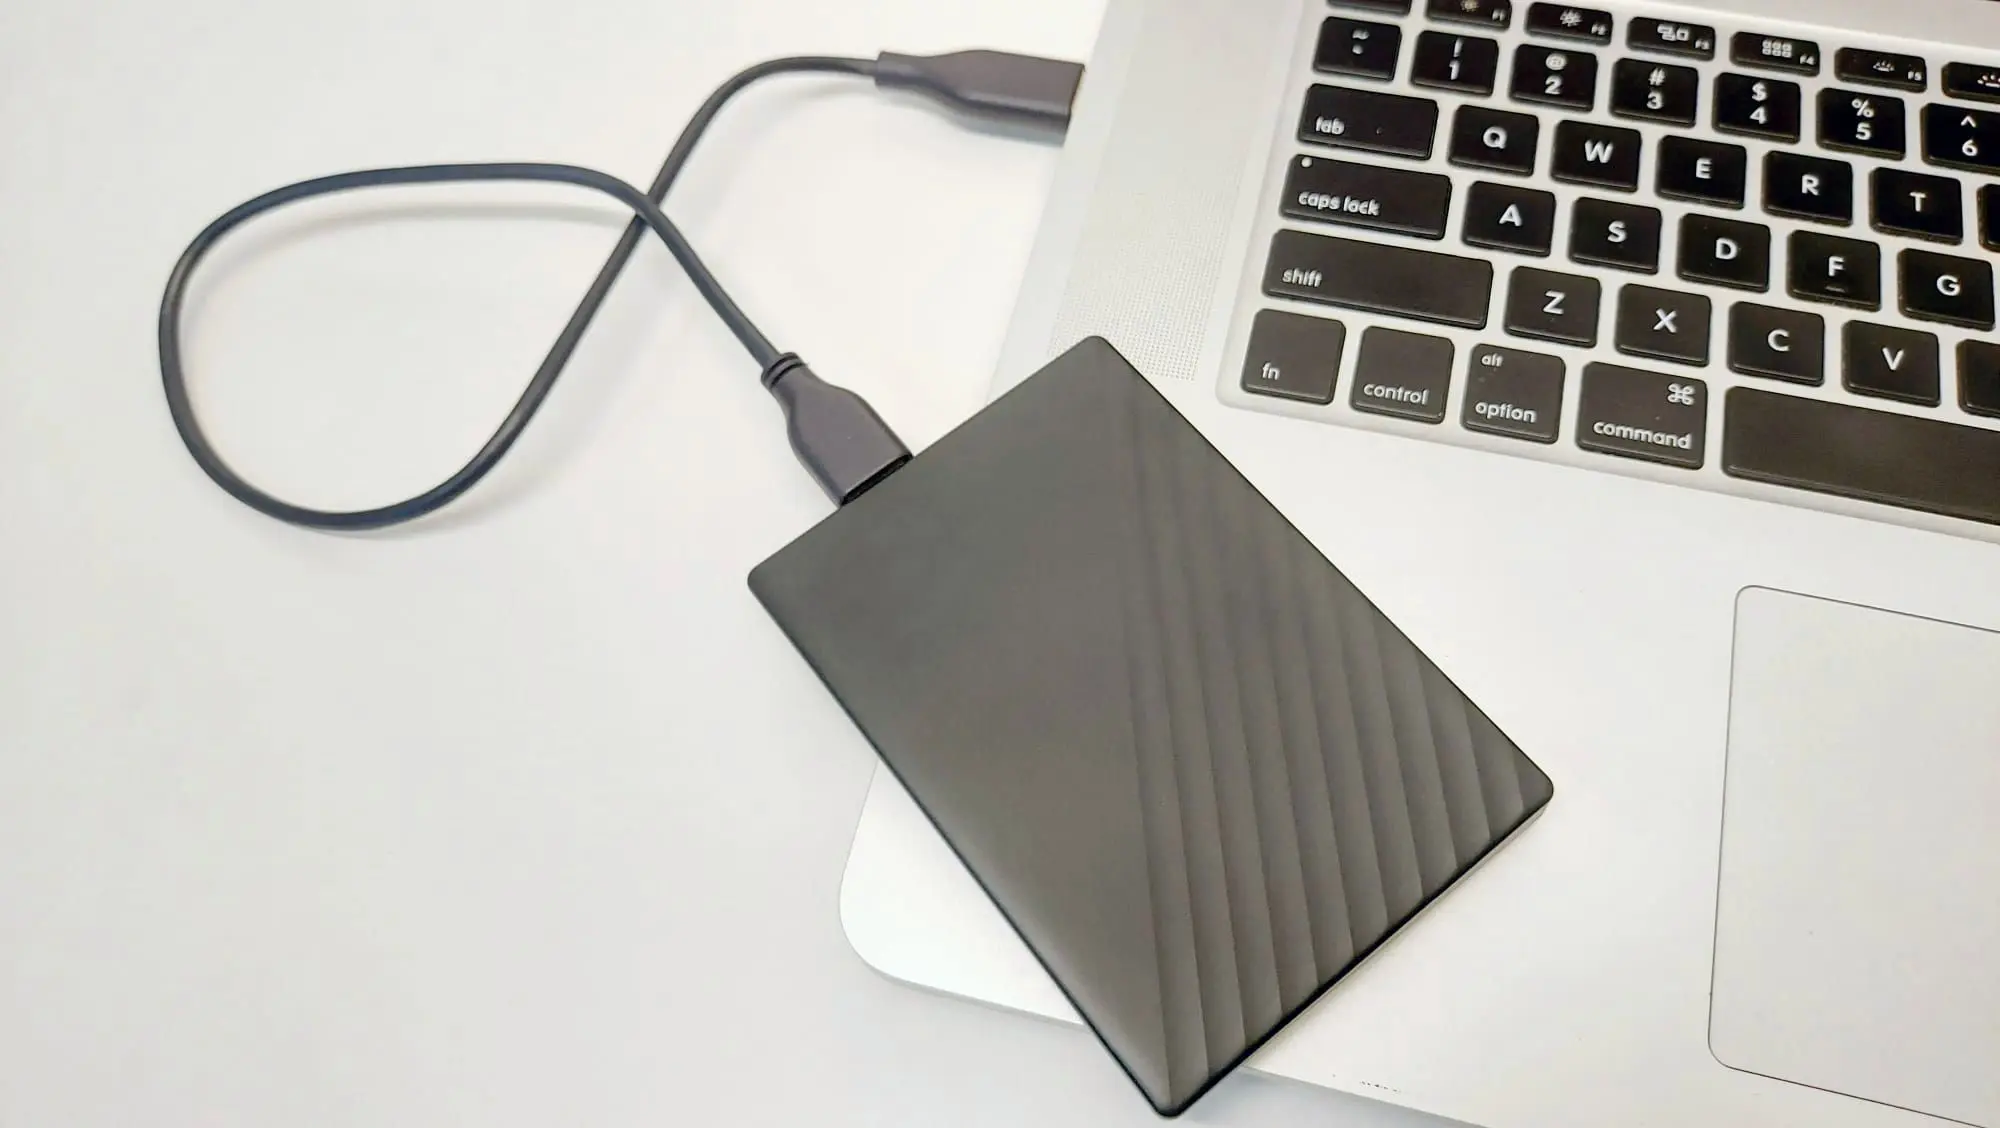 How to Fix External Hard Drive that Keeps Disconnecting [Solved]